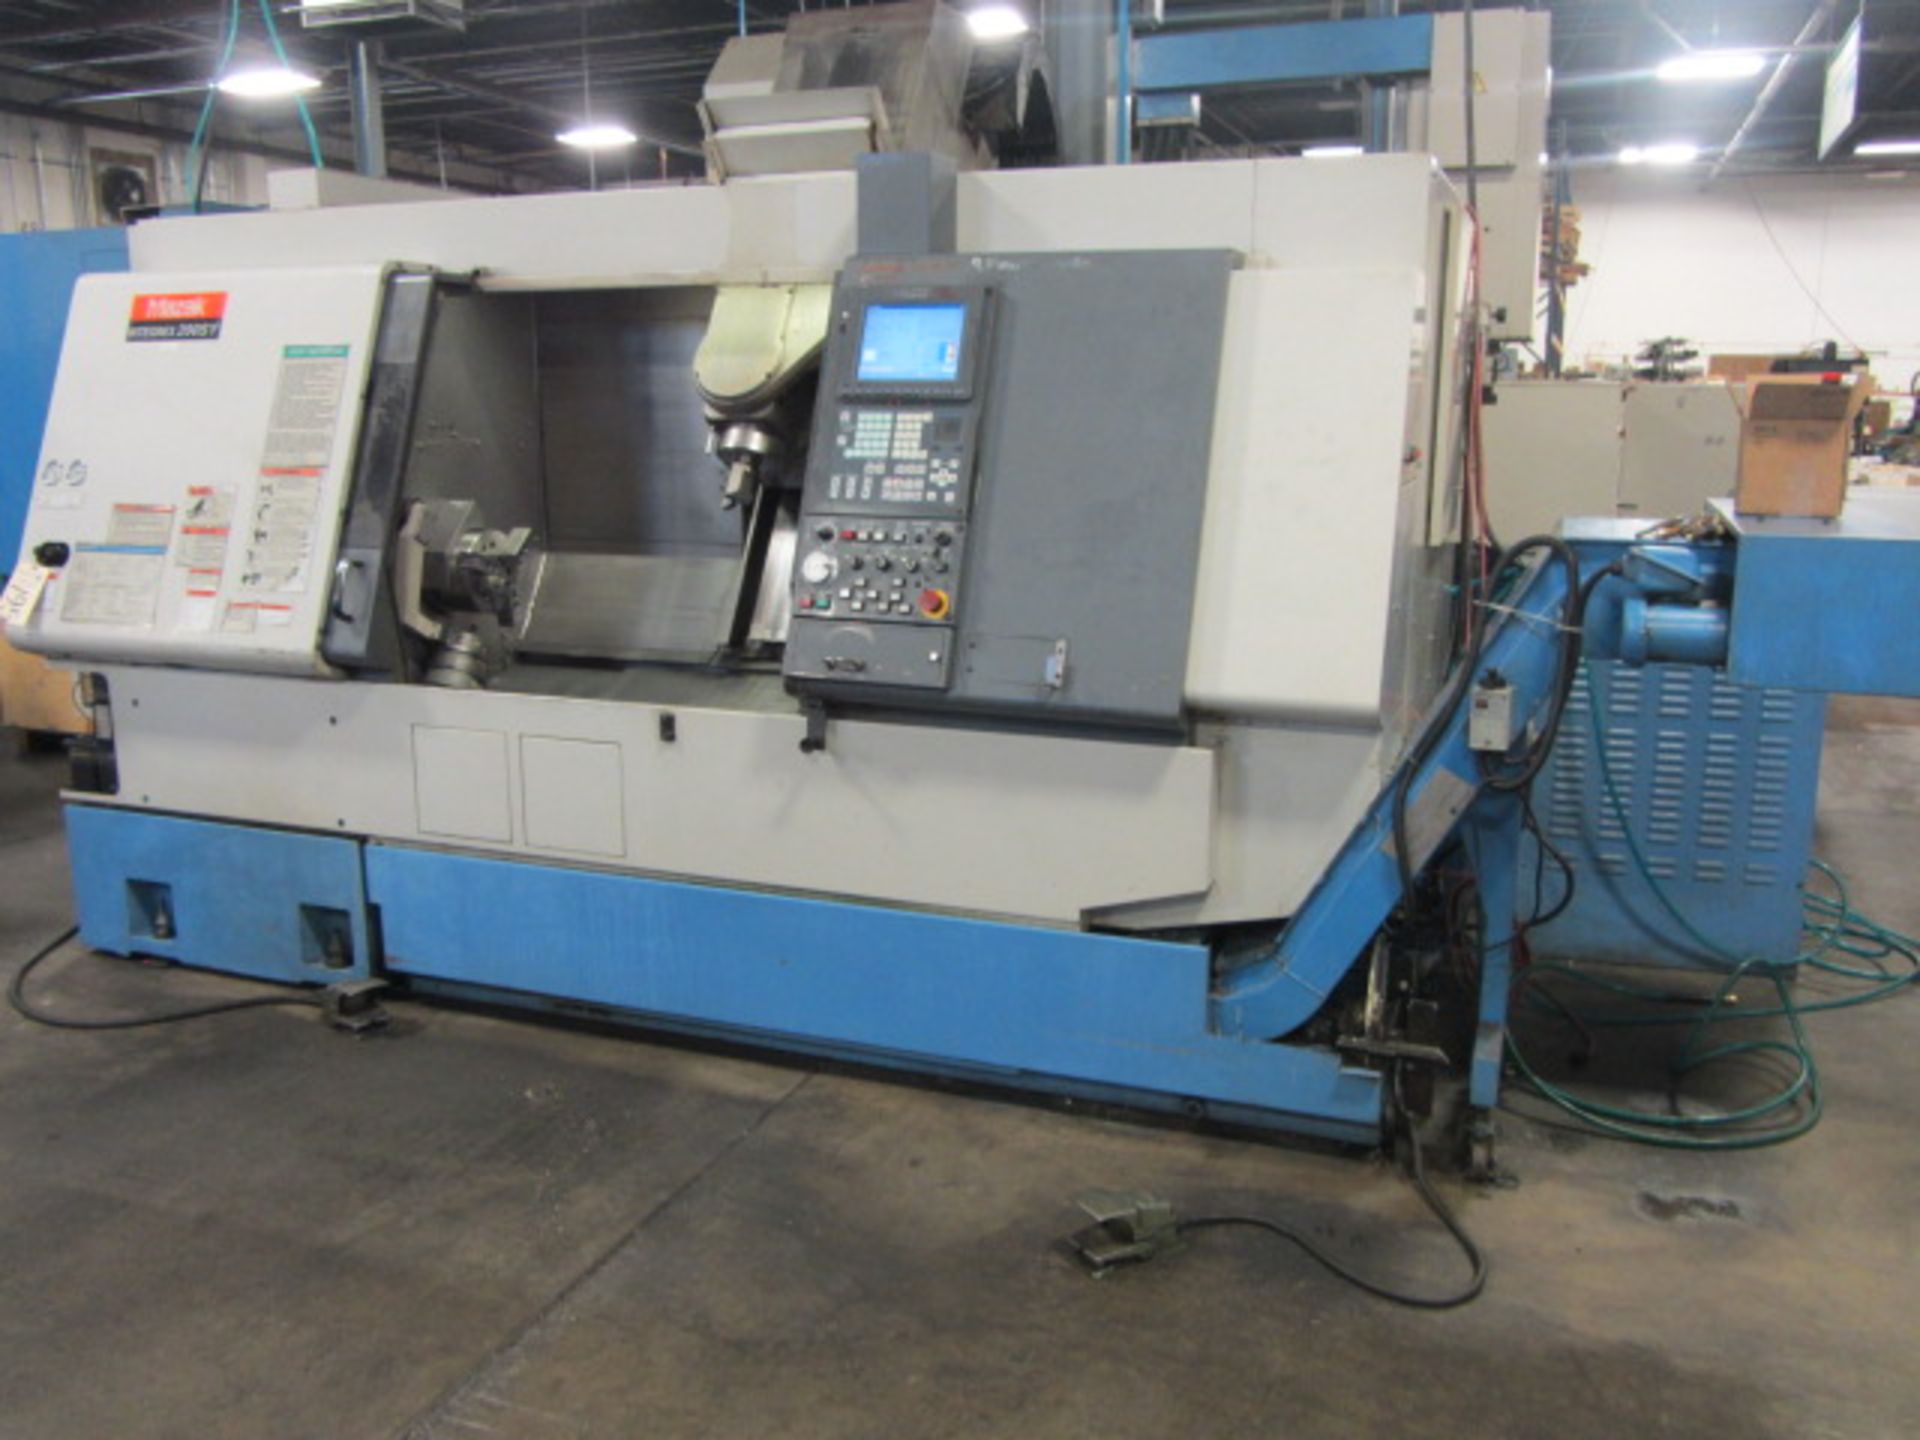 Mazak Integrex 200SY CNC Turning Center with Sub-Spindle, Milling & Y-Axis, 8'' Chuck on Main - Image 8 of 9